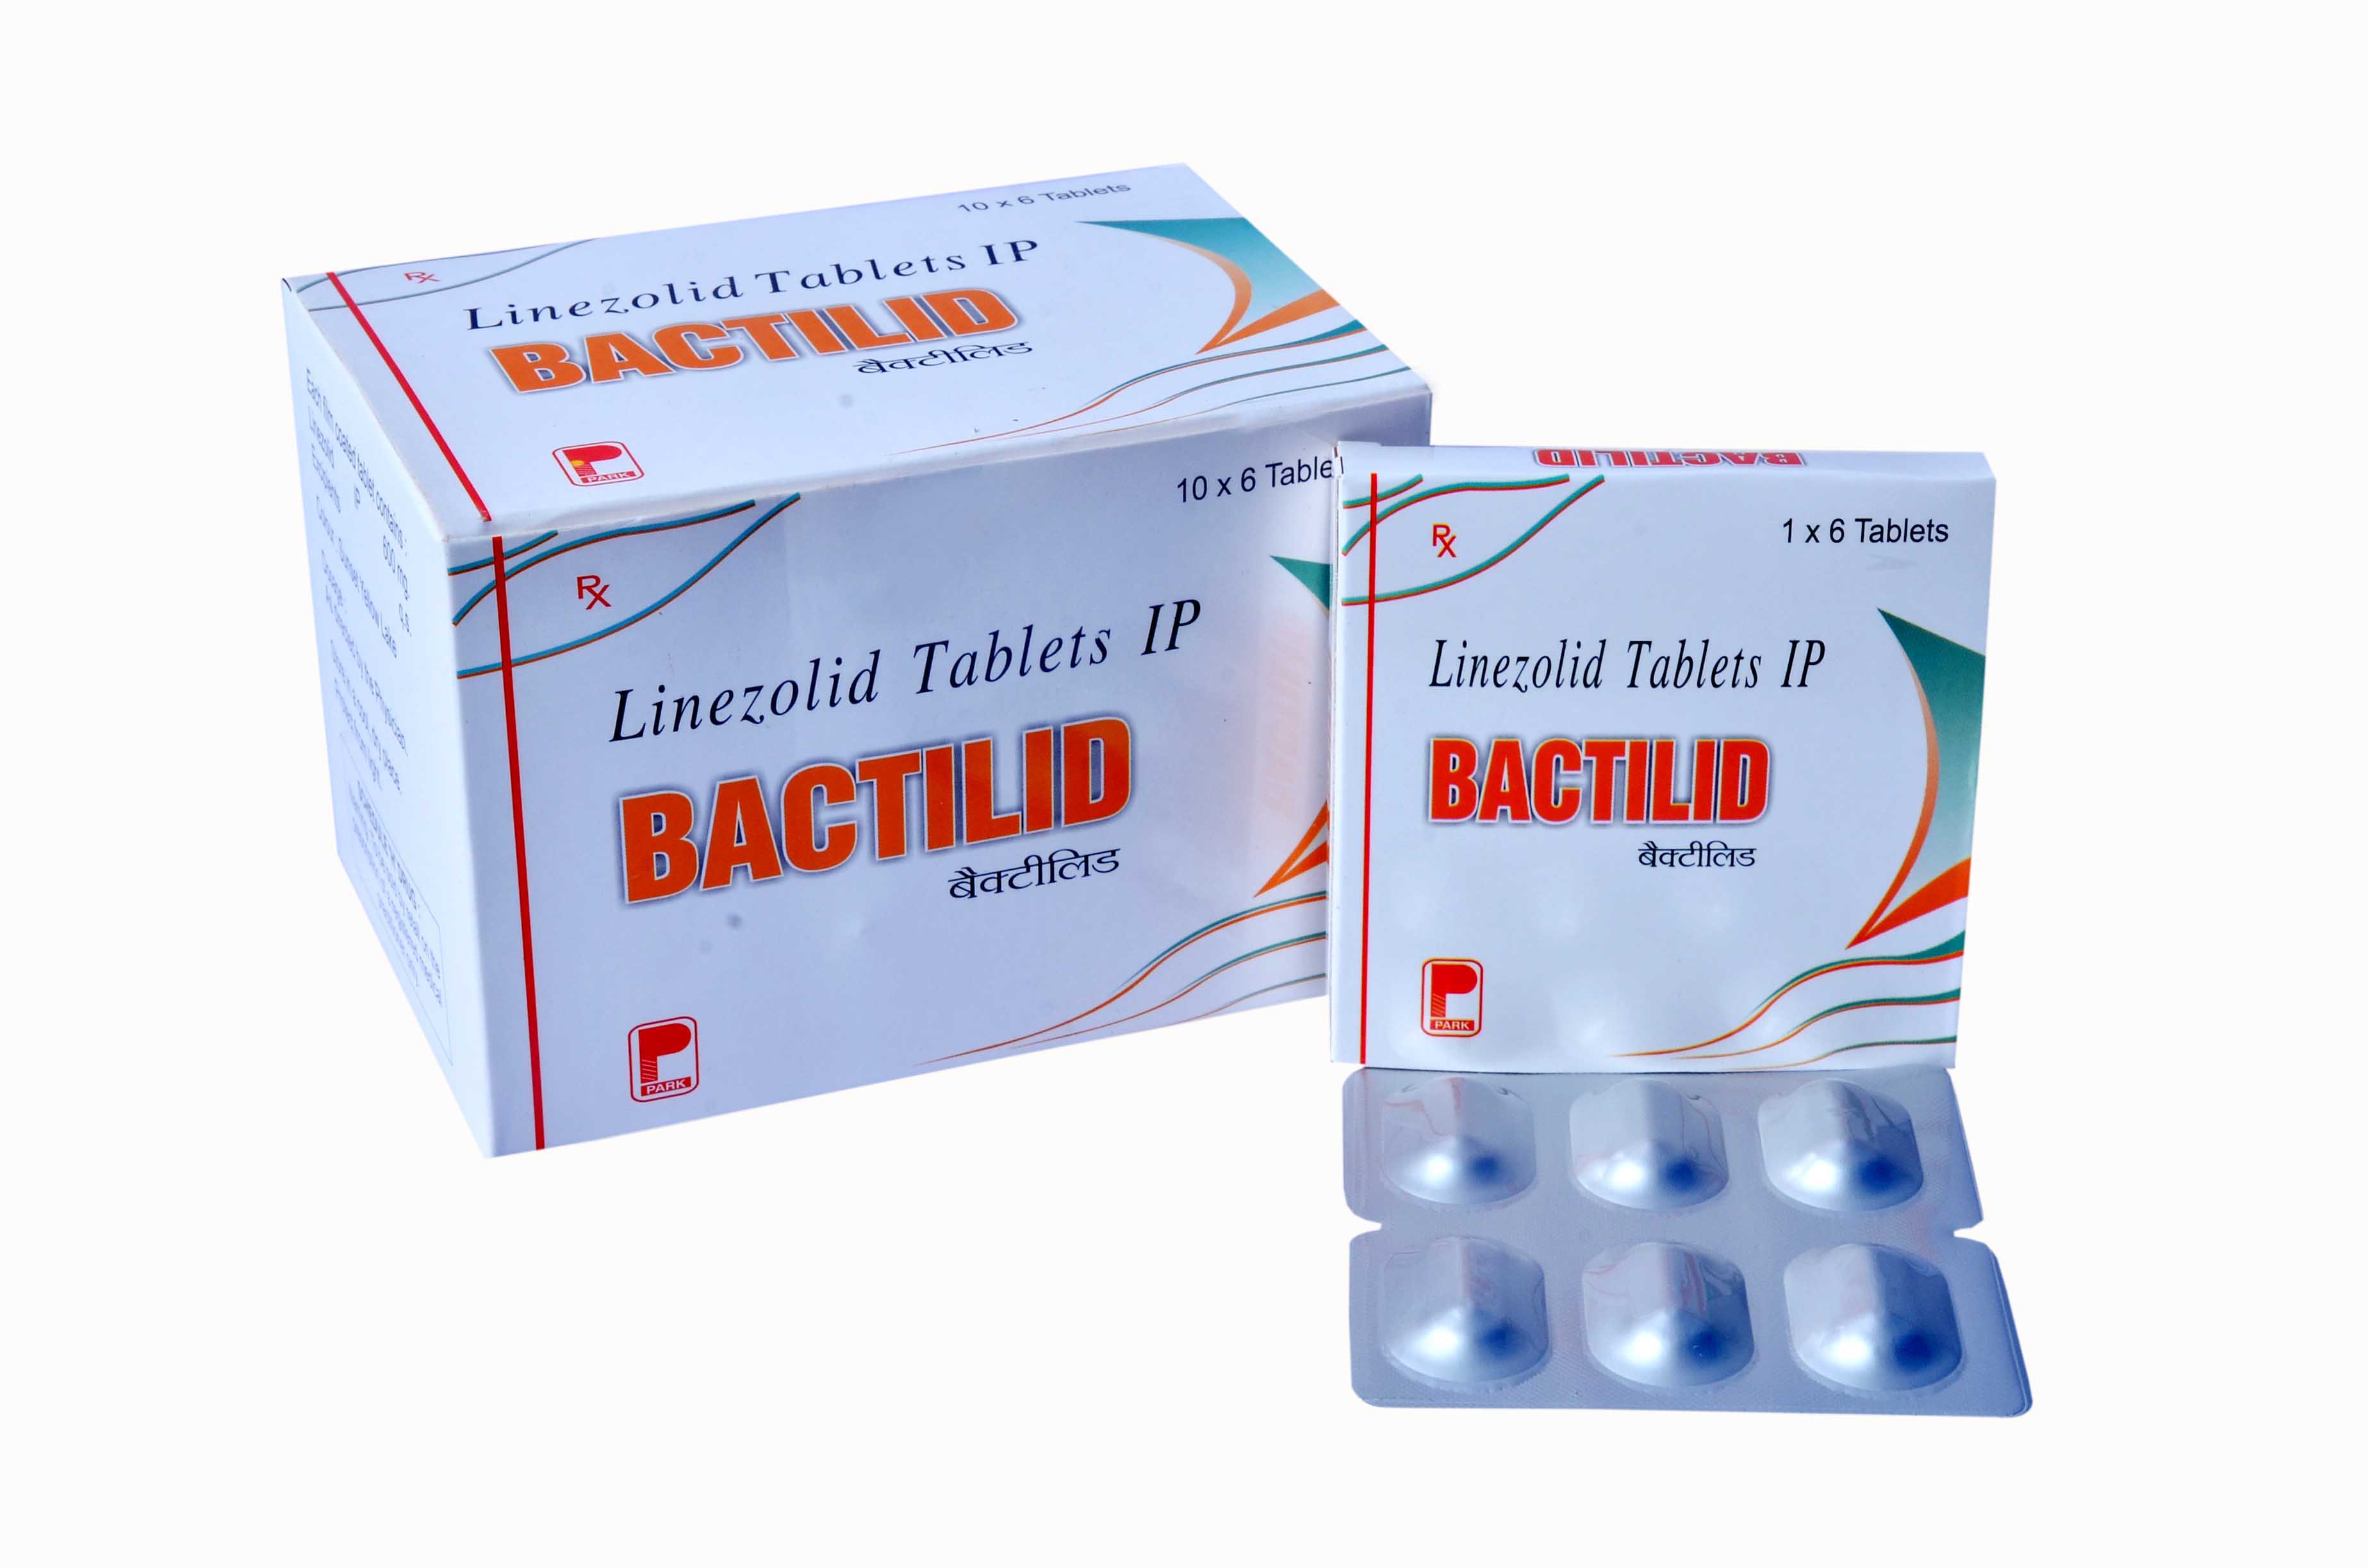 Product Name: BACTILID, Compositions of BACTILID are Linezolid Tablets IP - Park Pharmaceuticals